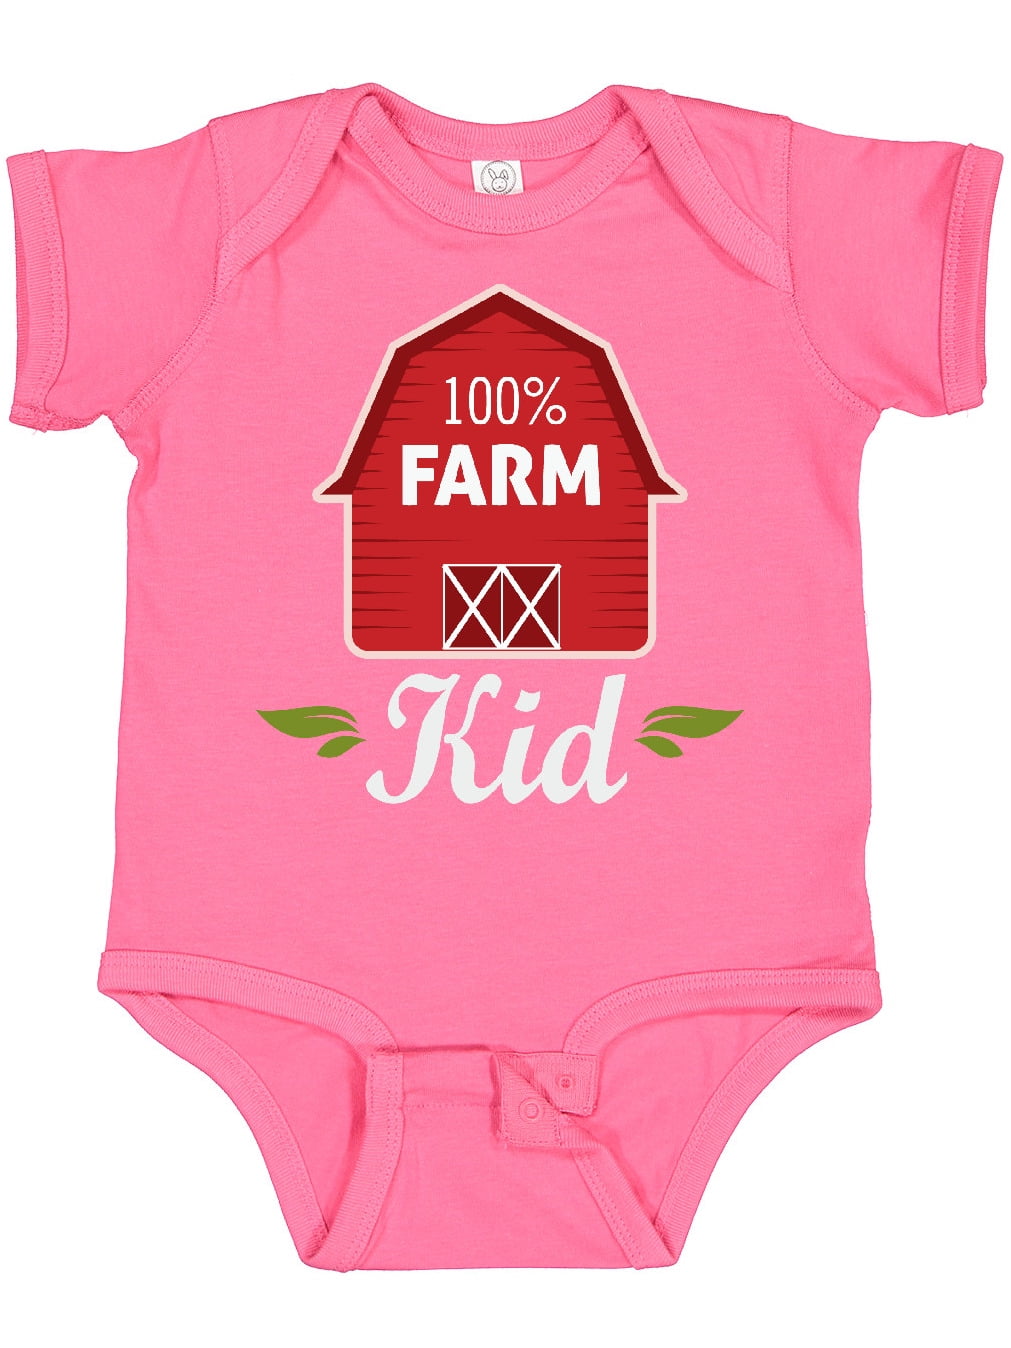 Gift Outfit for Boy /Girl Farm Baby.Easter Baby Vest Short Sleeve,Bodysuit Funny farm animals.